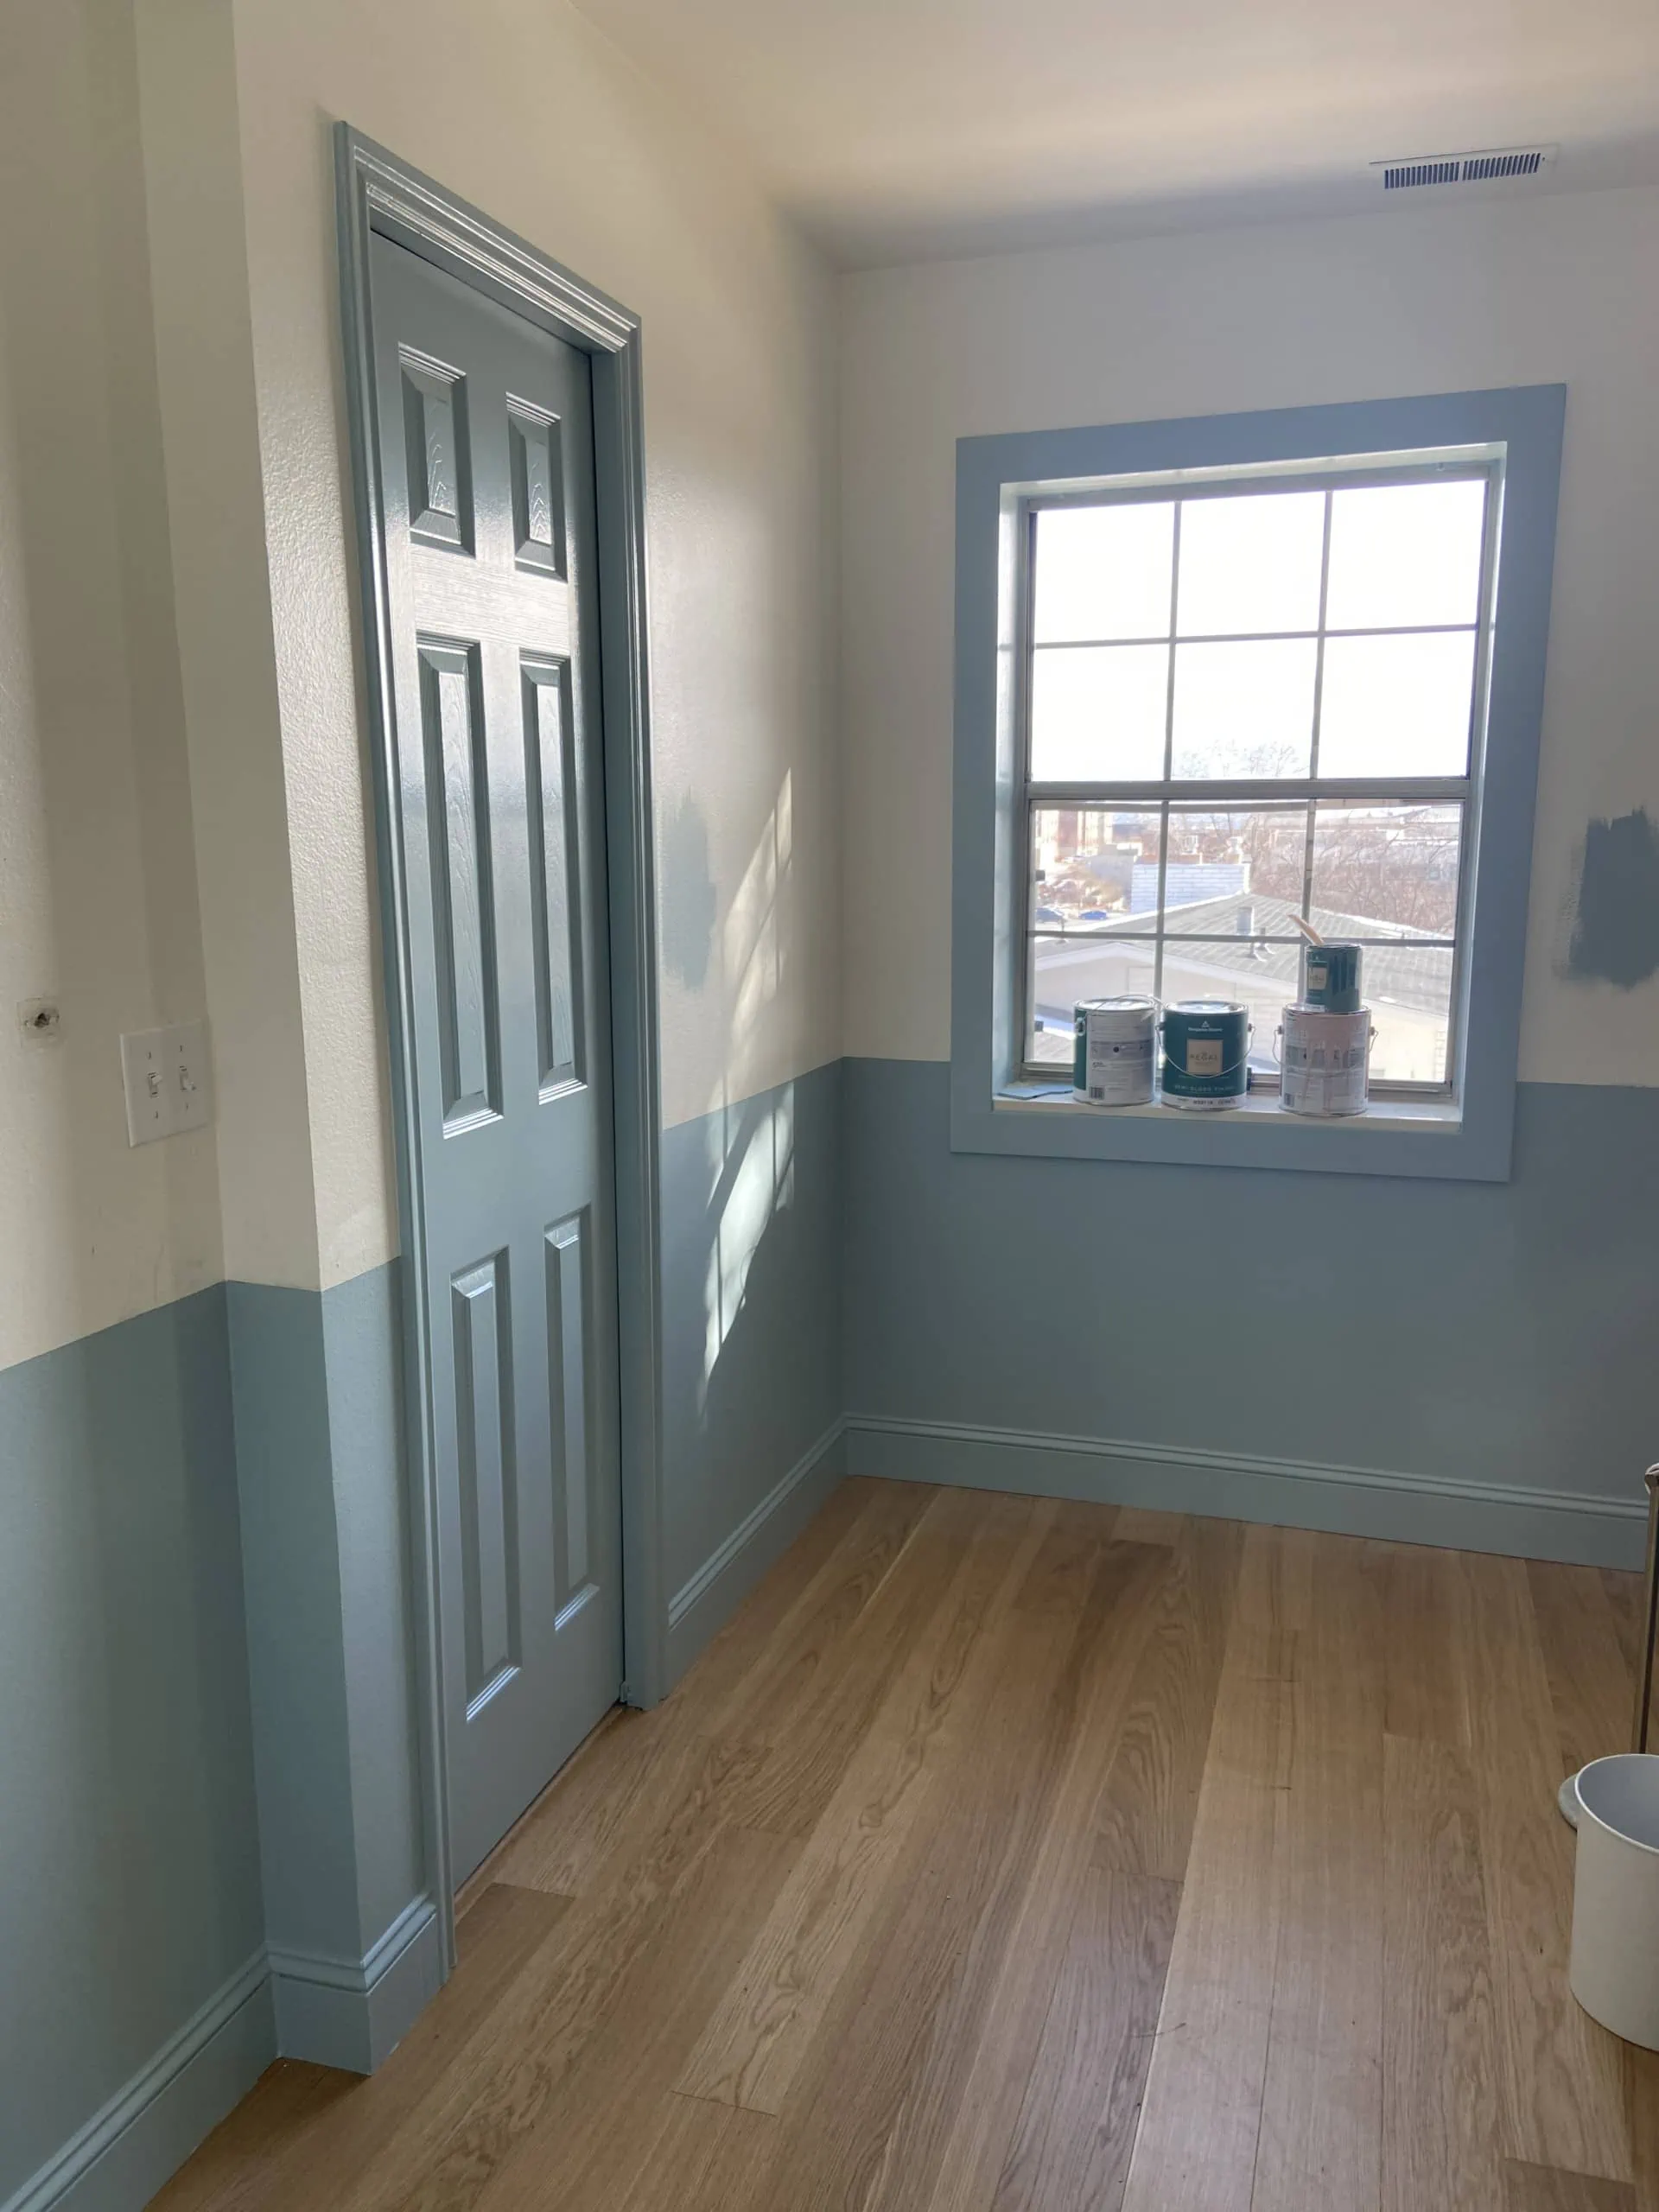 Interior shot of a room with wooden floors and blue and white walls.